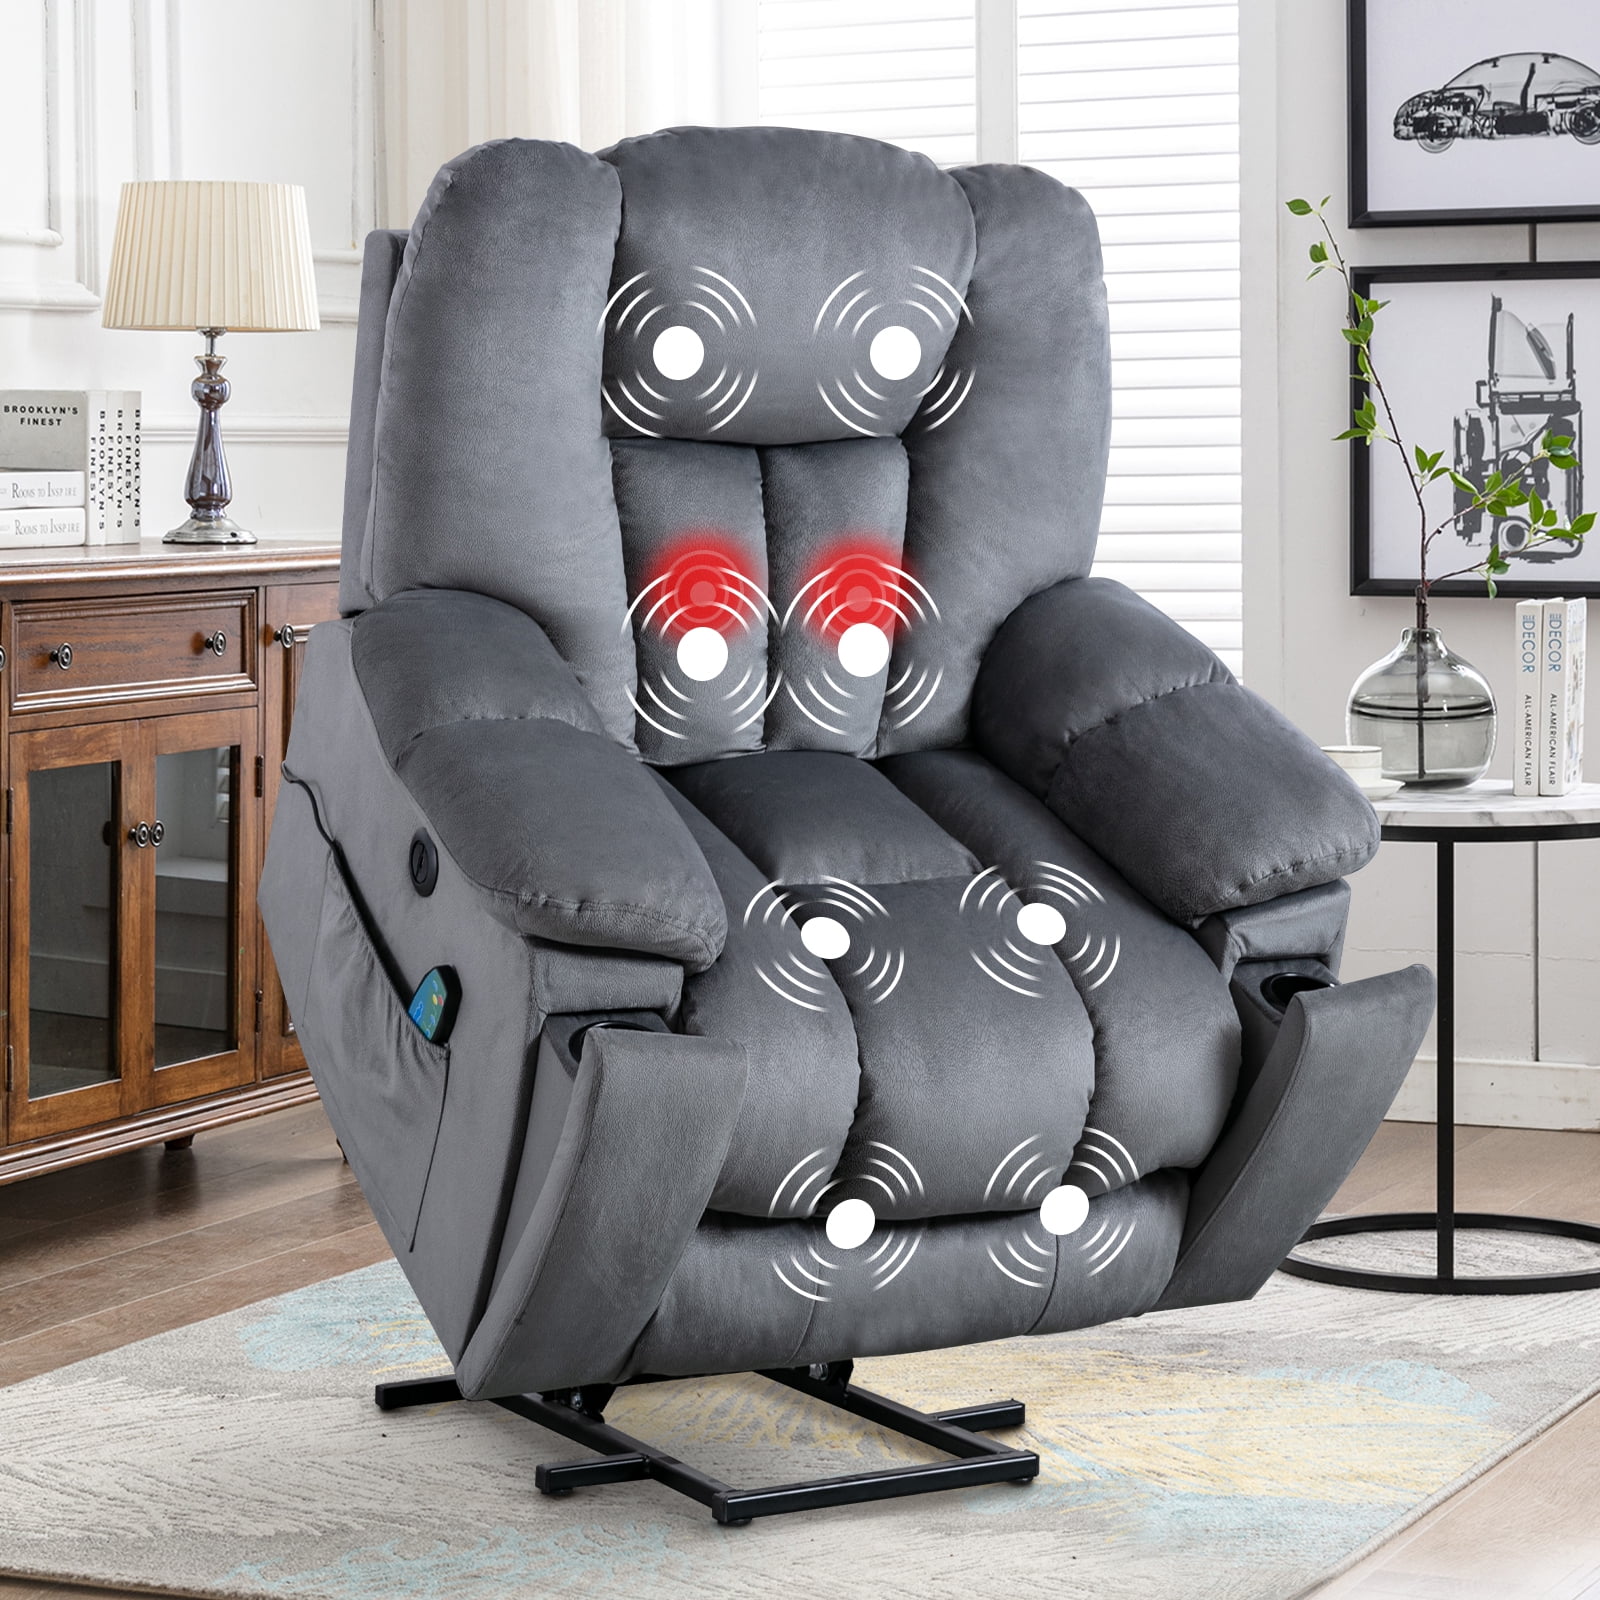 Lvuyoyo Massage Video Gaming Recliner -Ergonomic Office Computer Desk Chair -High Back PU Leather - Adjustable Swivel Reclining Chair with Lumbar